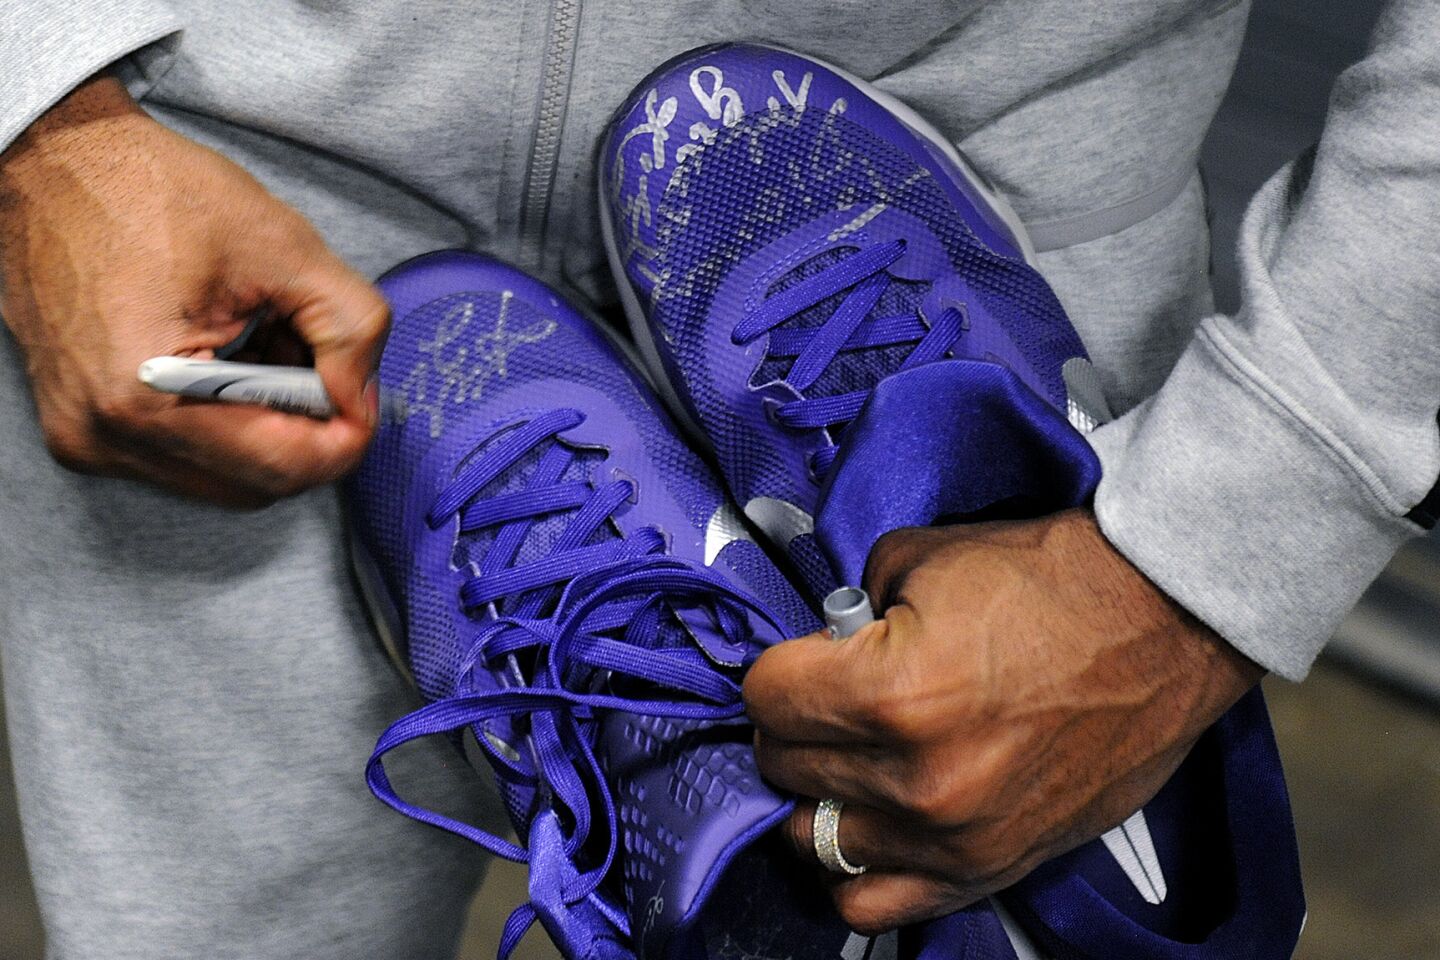 Kobe Bryant signs a pair of shoes for a fan after a game against the Suns in Phoenix on March 23.